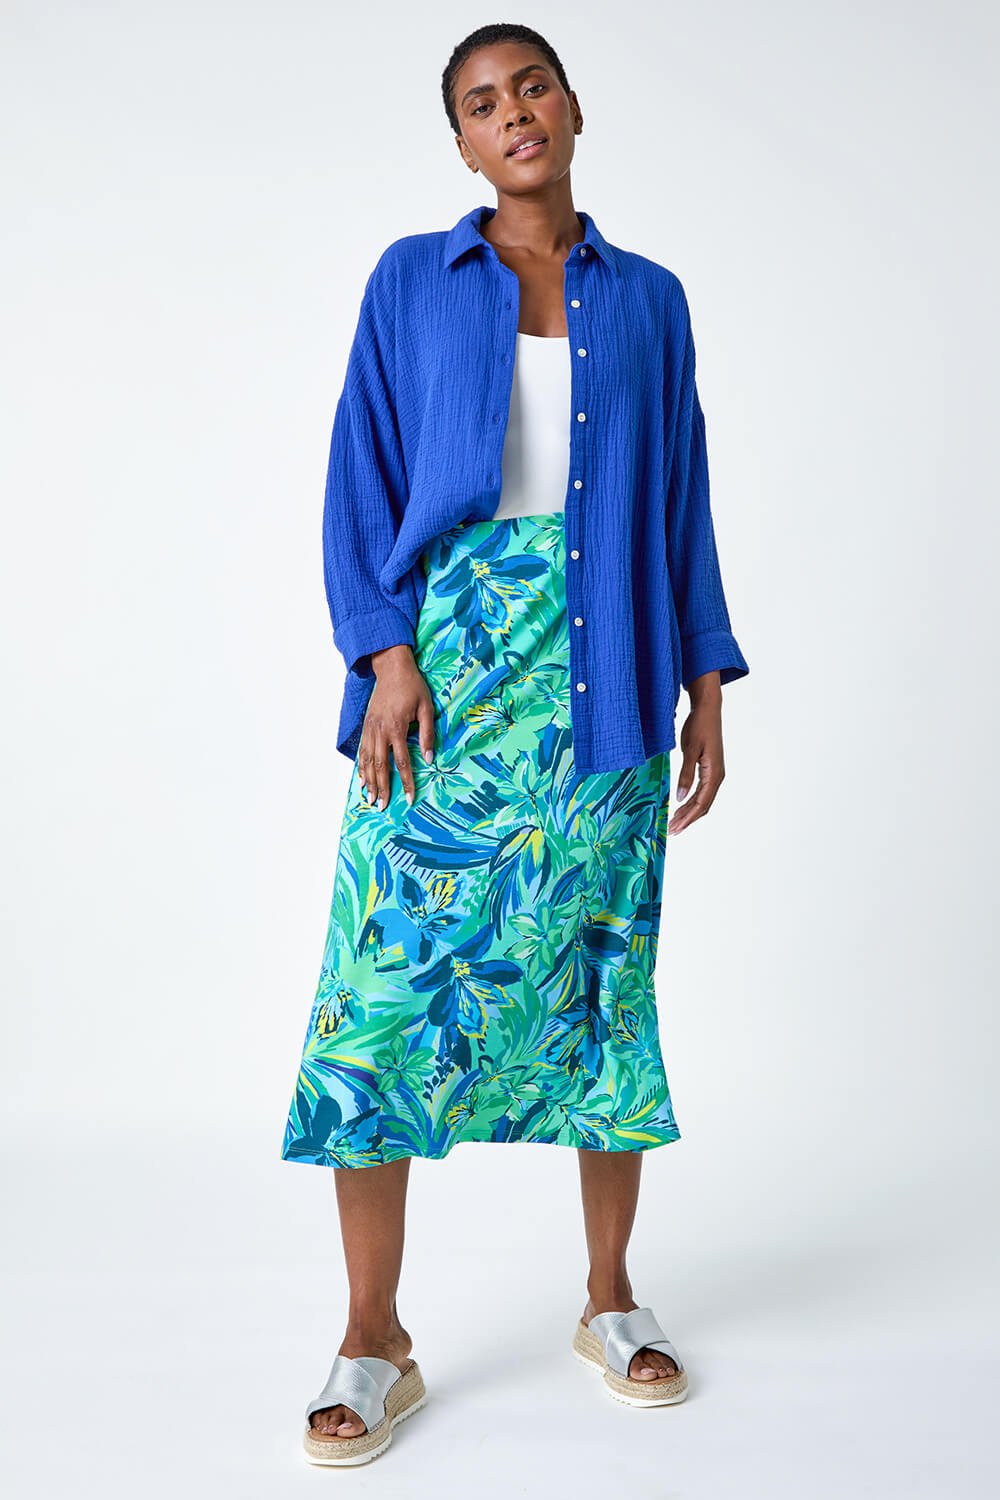 Green Tropical Floral Stretch Panel Skirt, Image 2 of 5